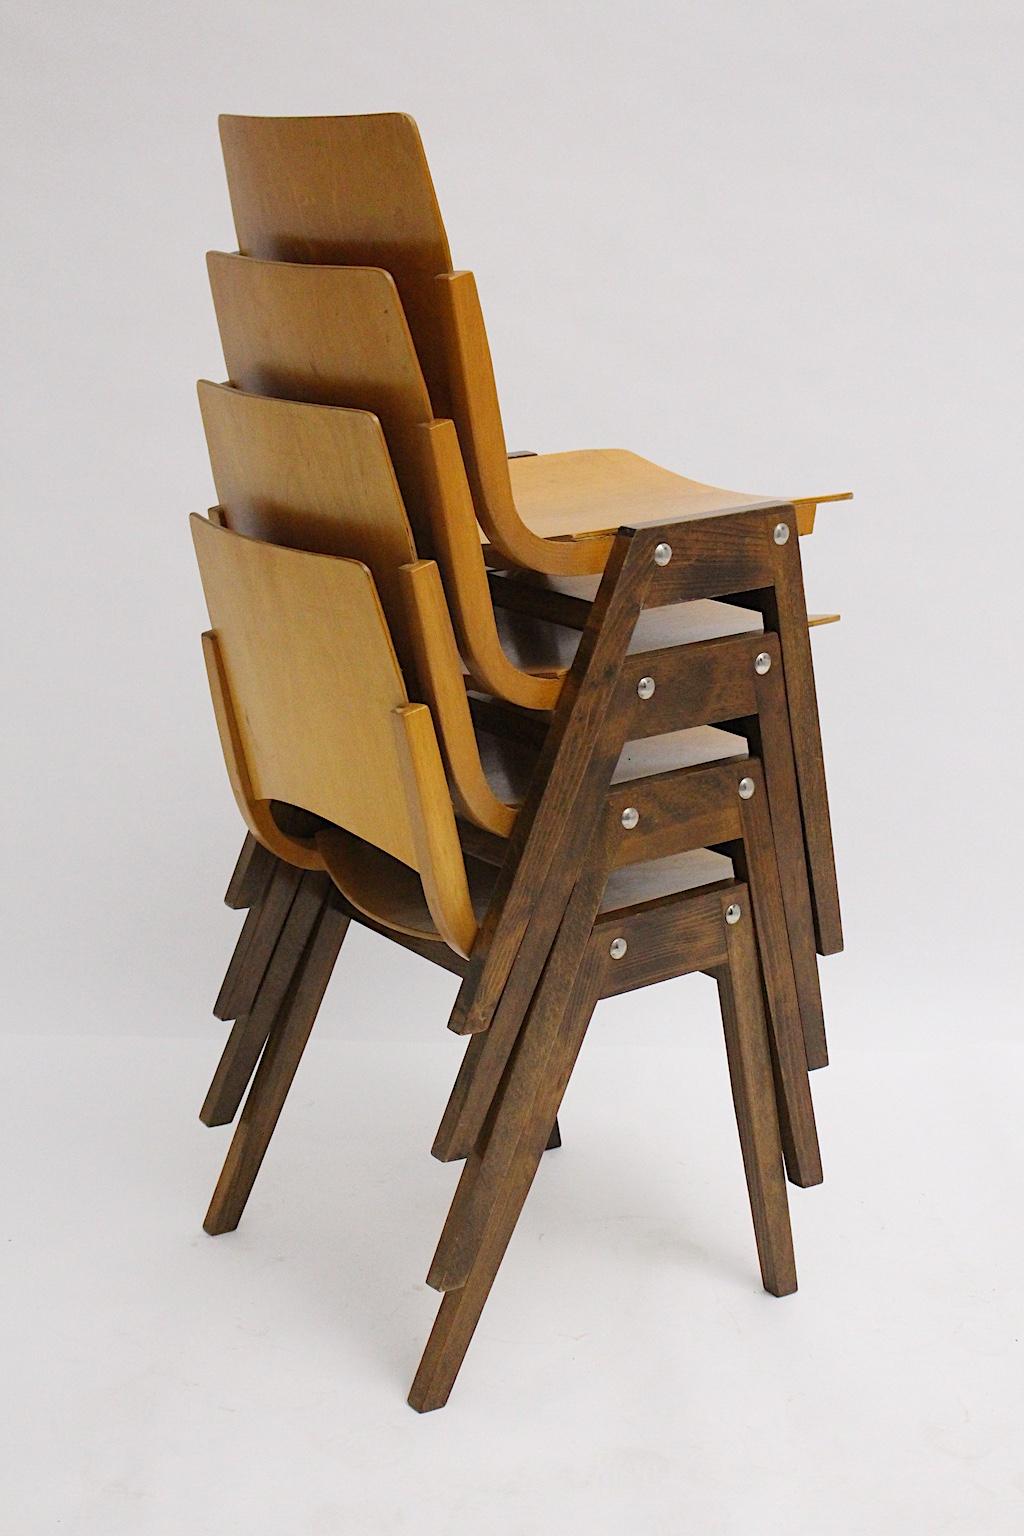 Mid-Century Modern Vintage Beech Bicolor Dining Chairs Roland Rainer 1952 Vienna For Sale 4